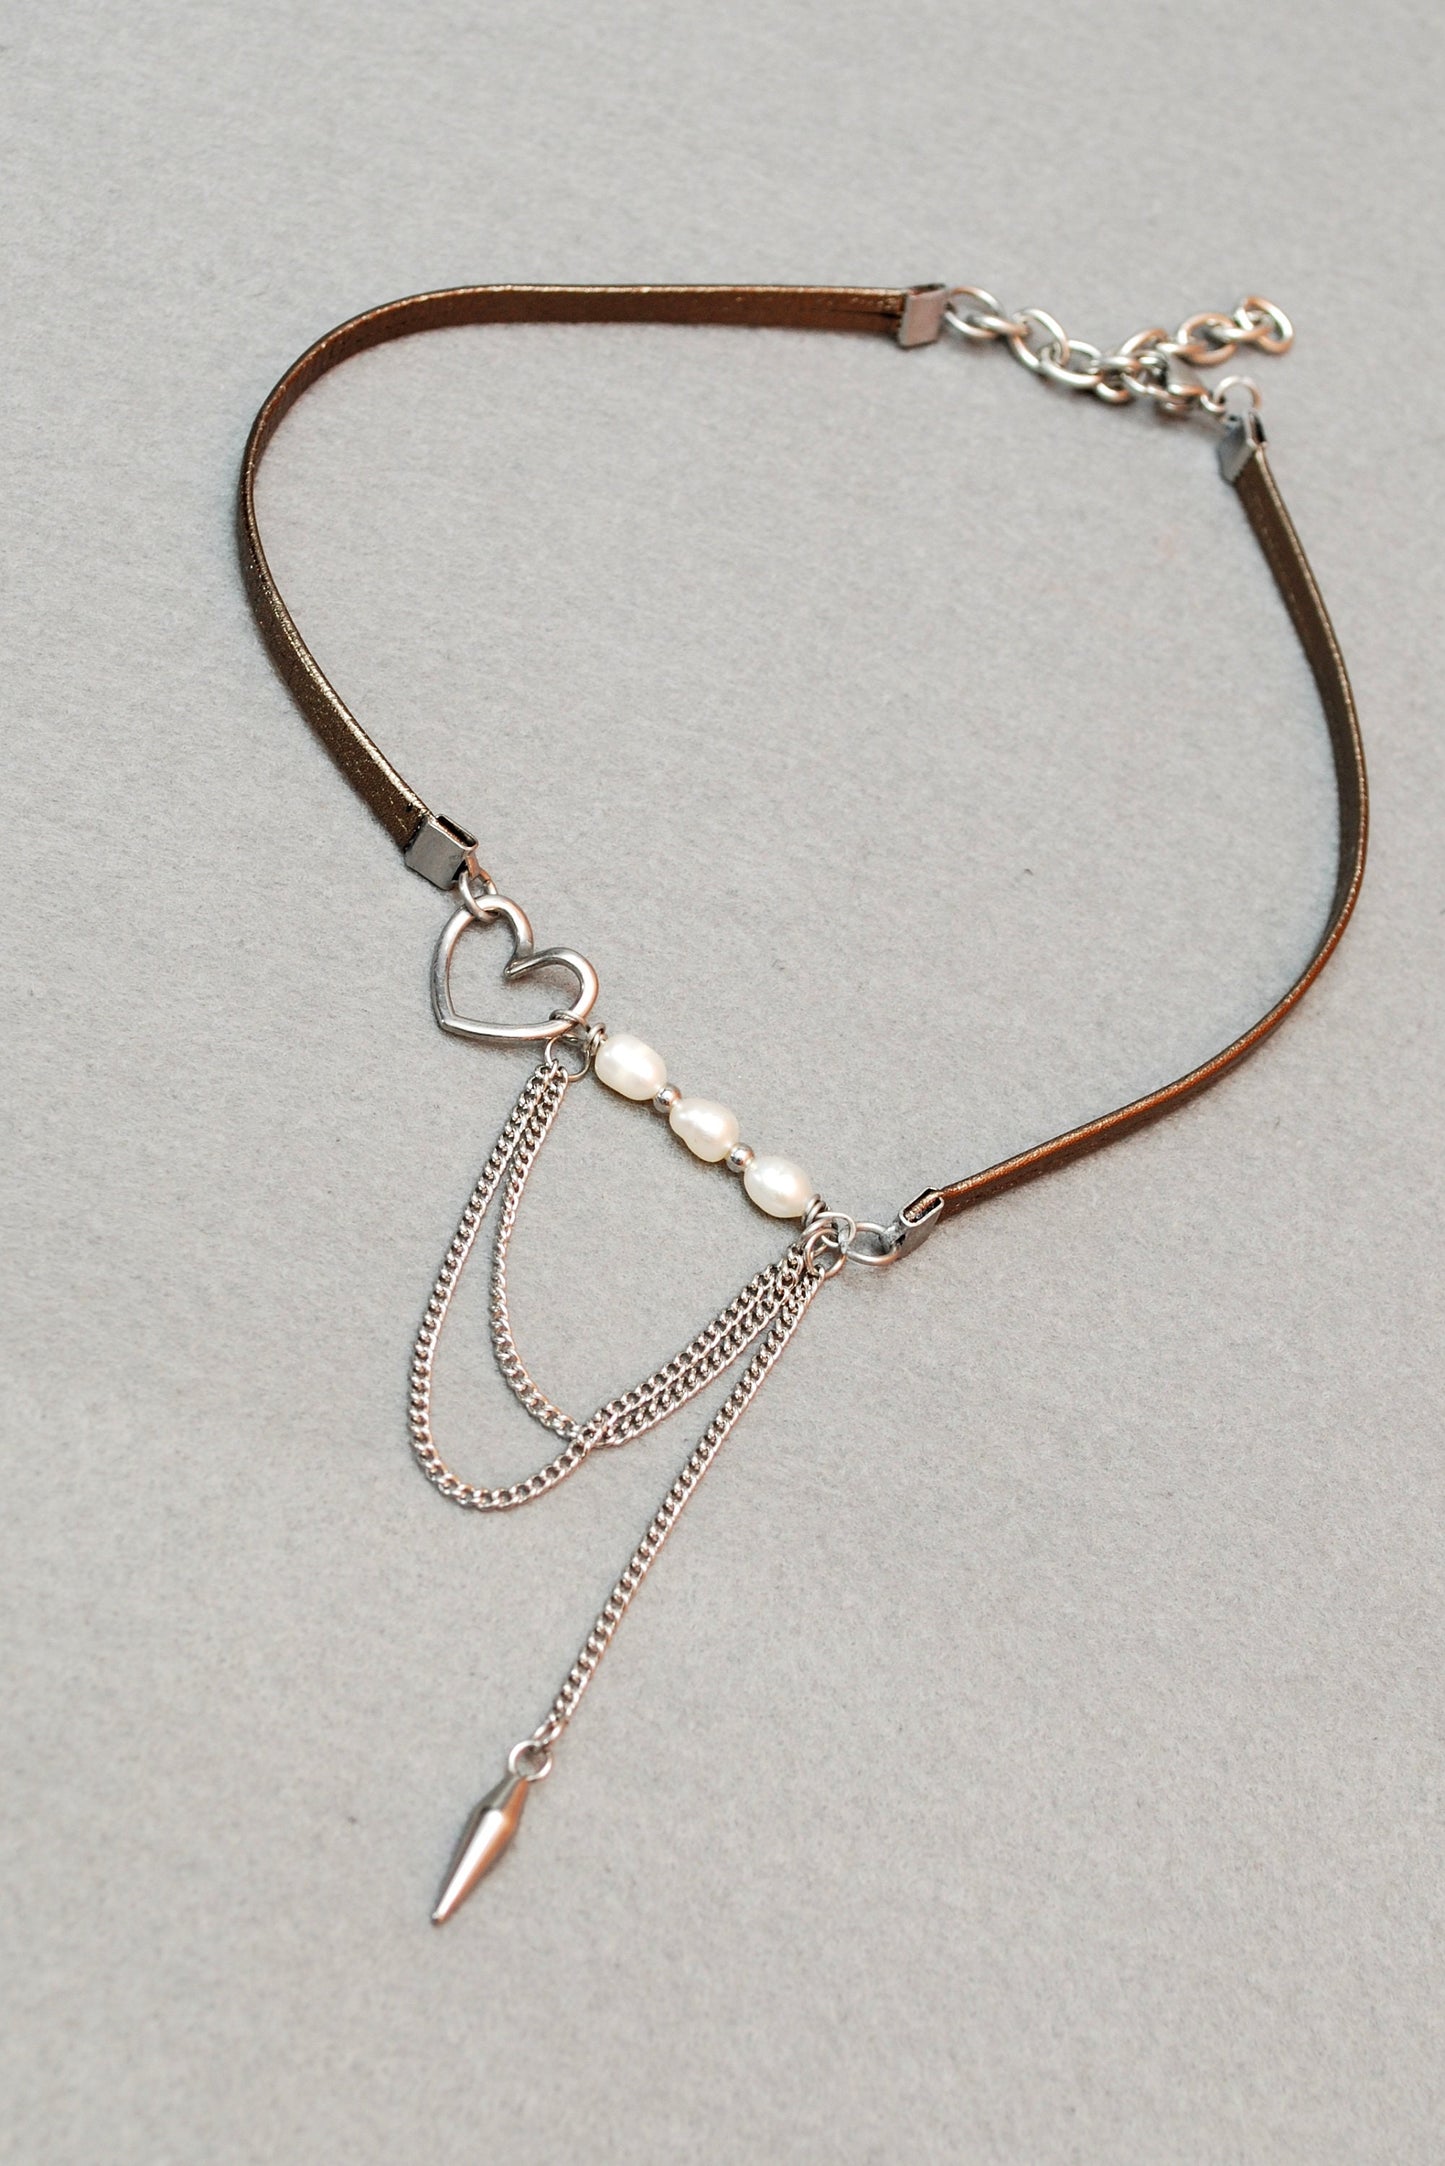 Sexy Choker, Brown & Silver Leather Choker,  Stainless Steel Chain, With Freshwater Pearls, Spike beads charms. 35 cm - 14 inches